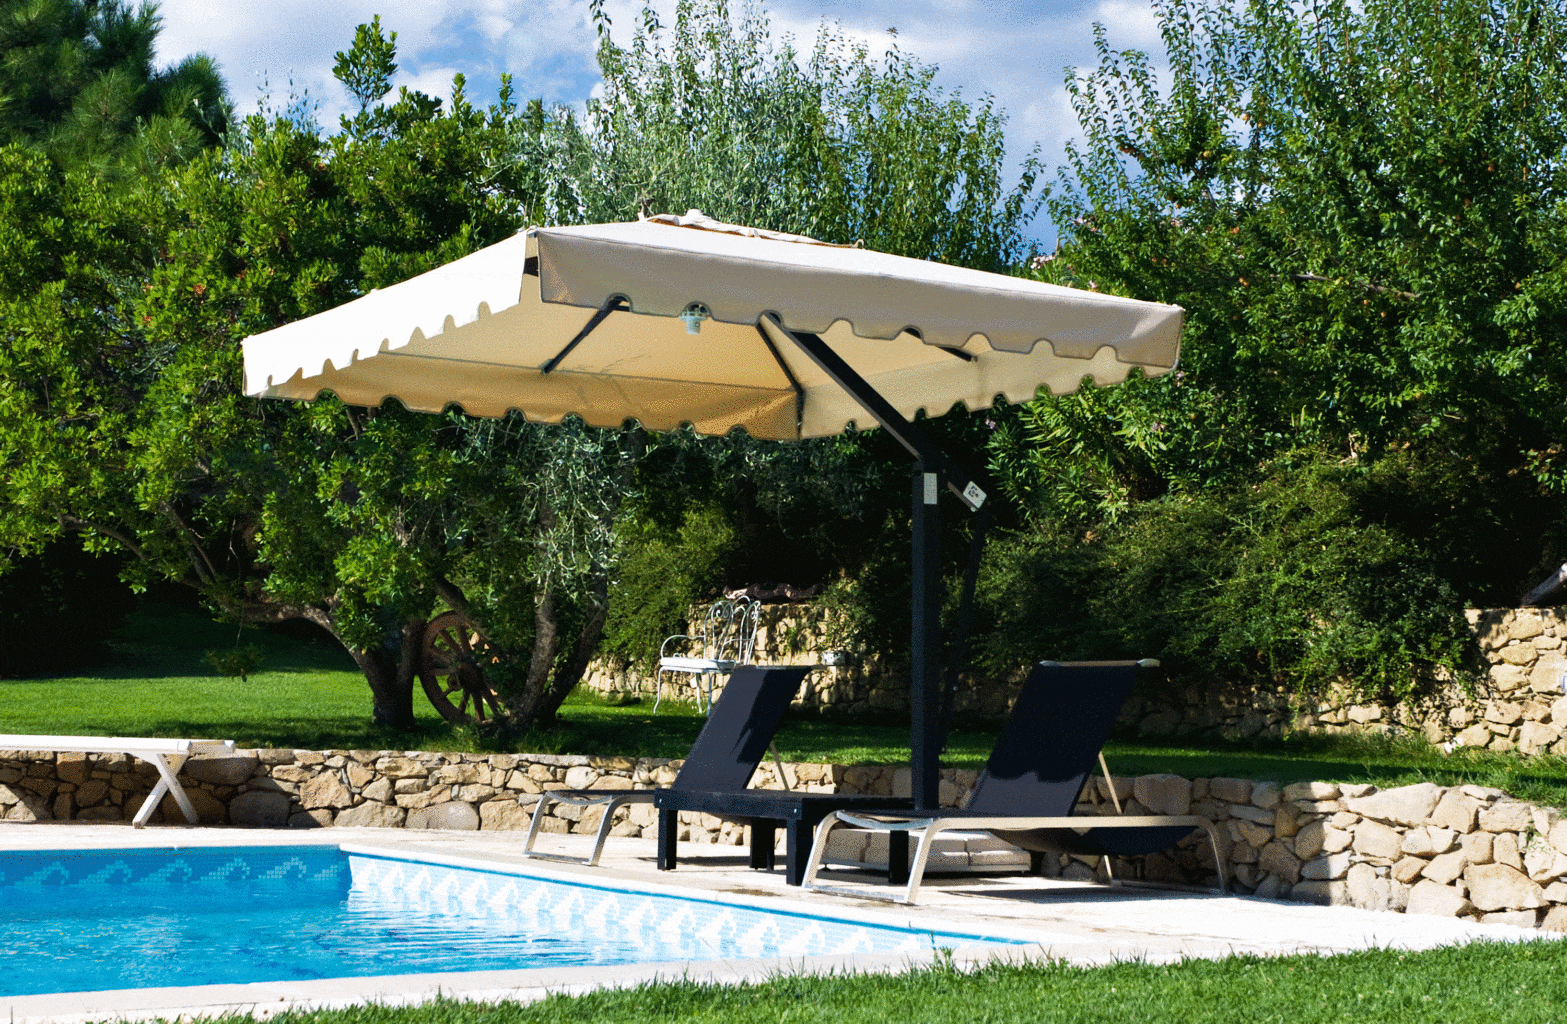 What Type of Base is Best for Your Residential Umbrellas, 2 3